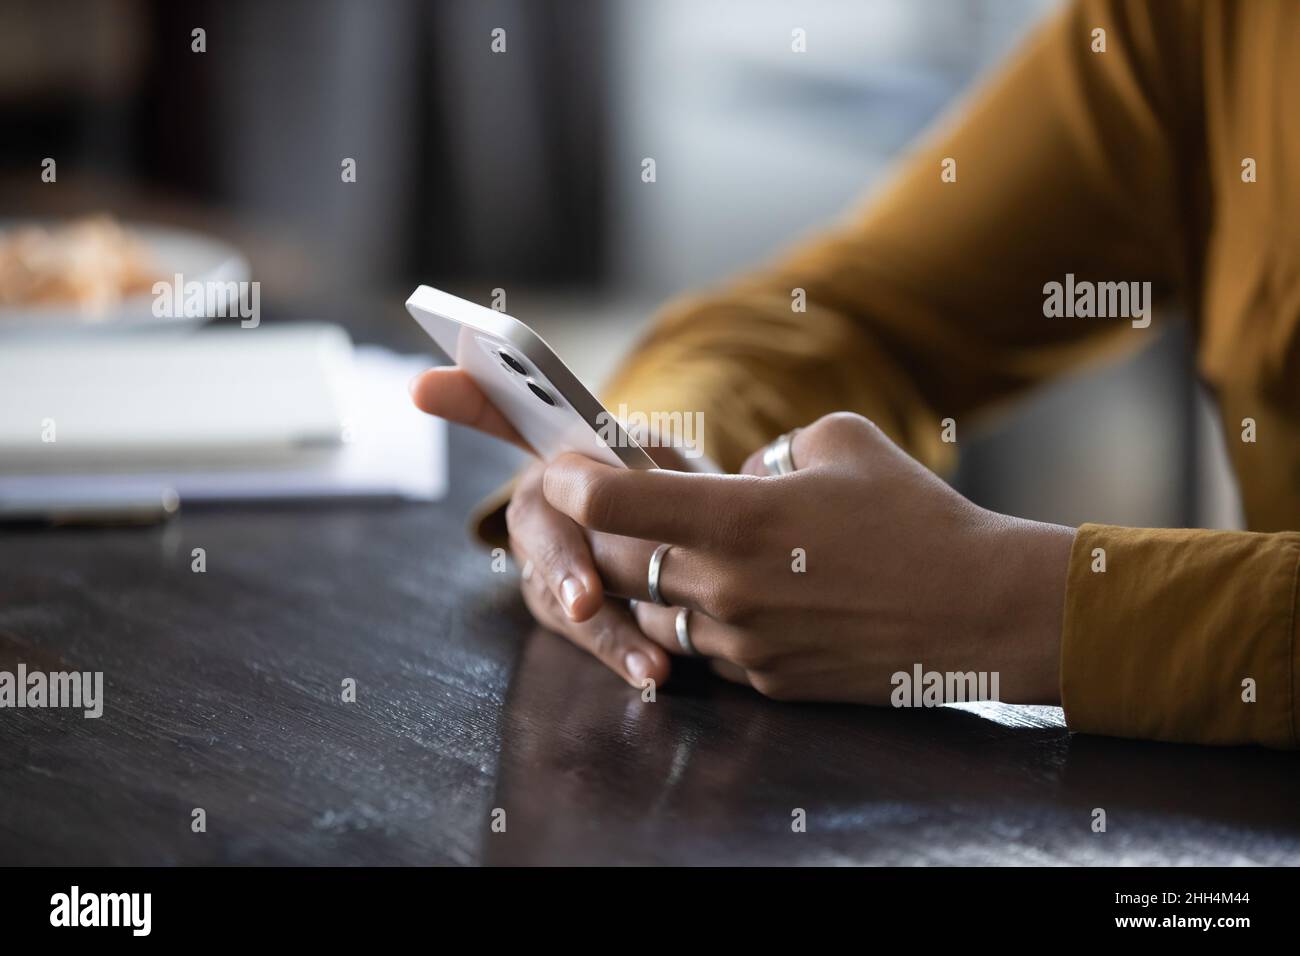 Hands of young dark skinned woman using app on phone Stock Photo